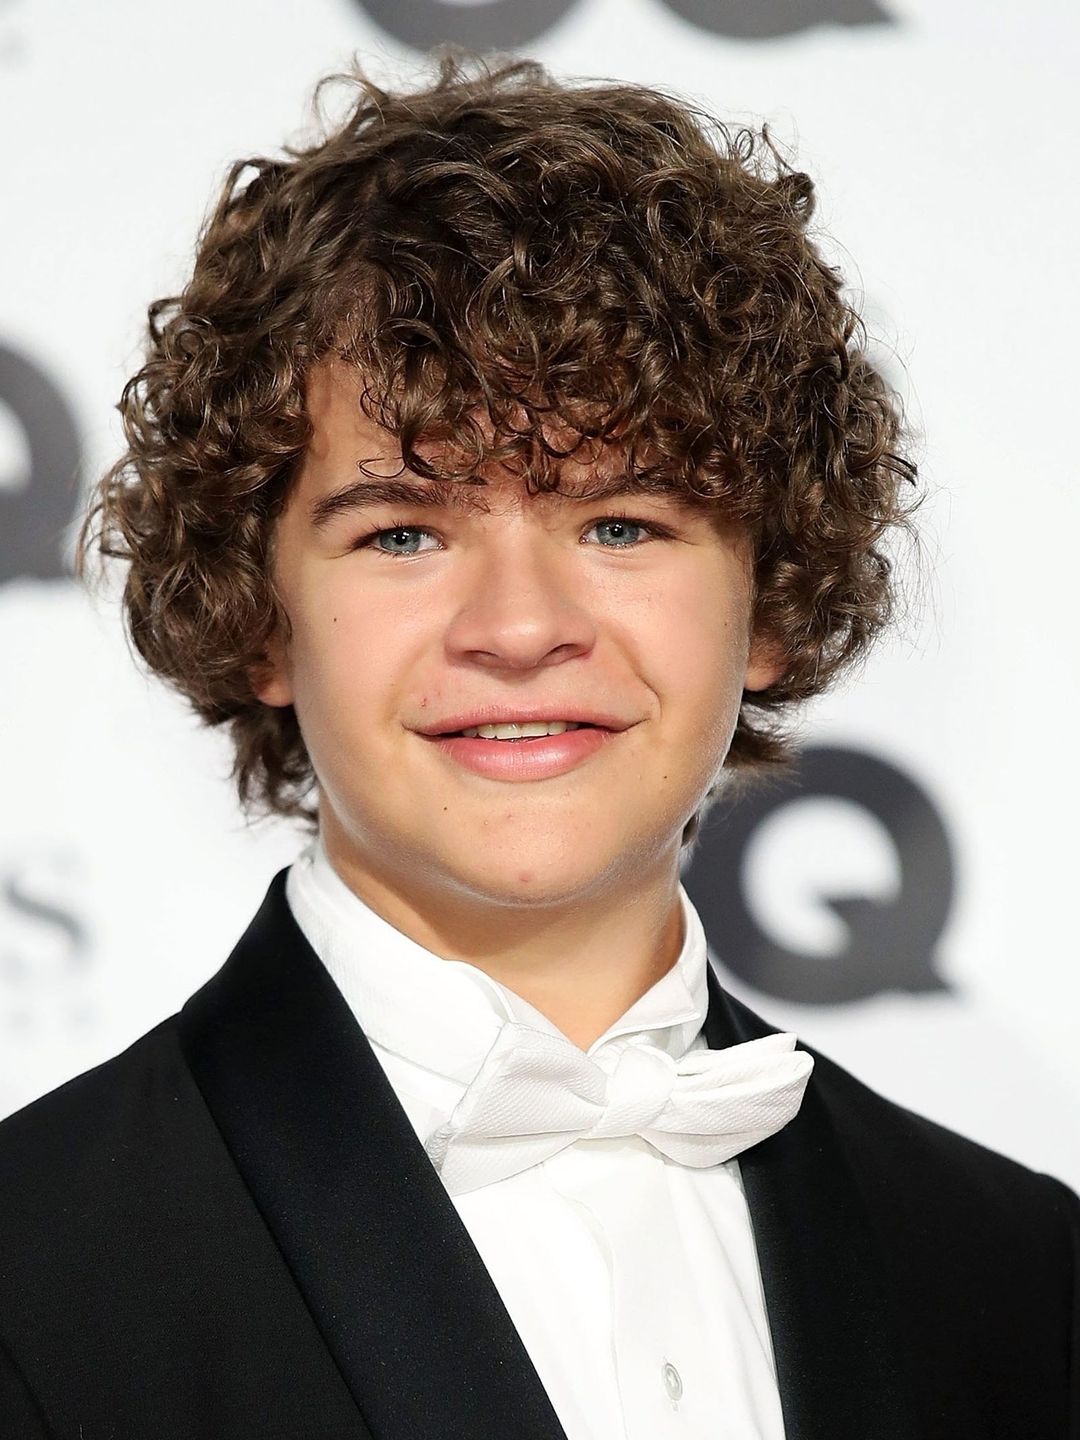 Gaten Matarazzo does he have a wife